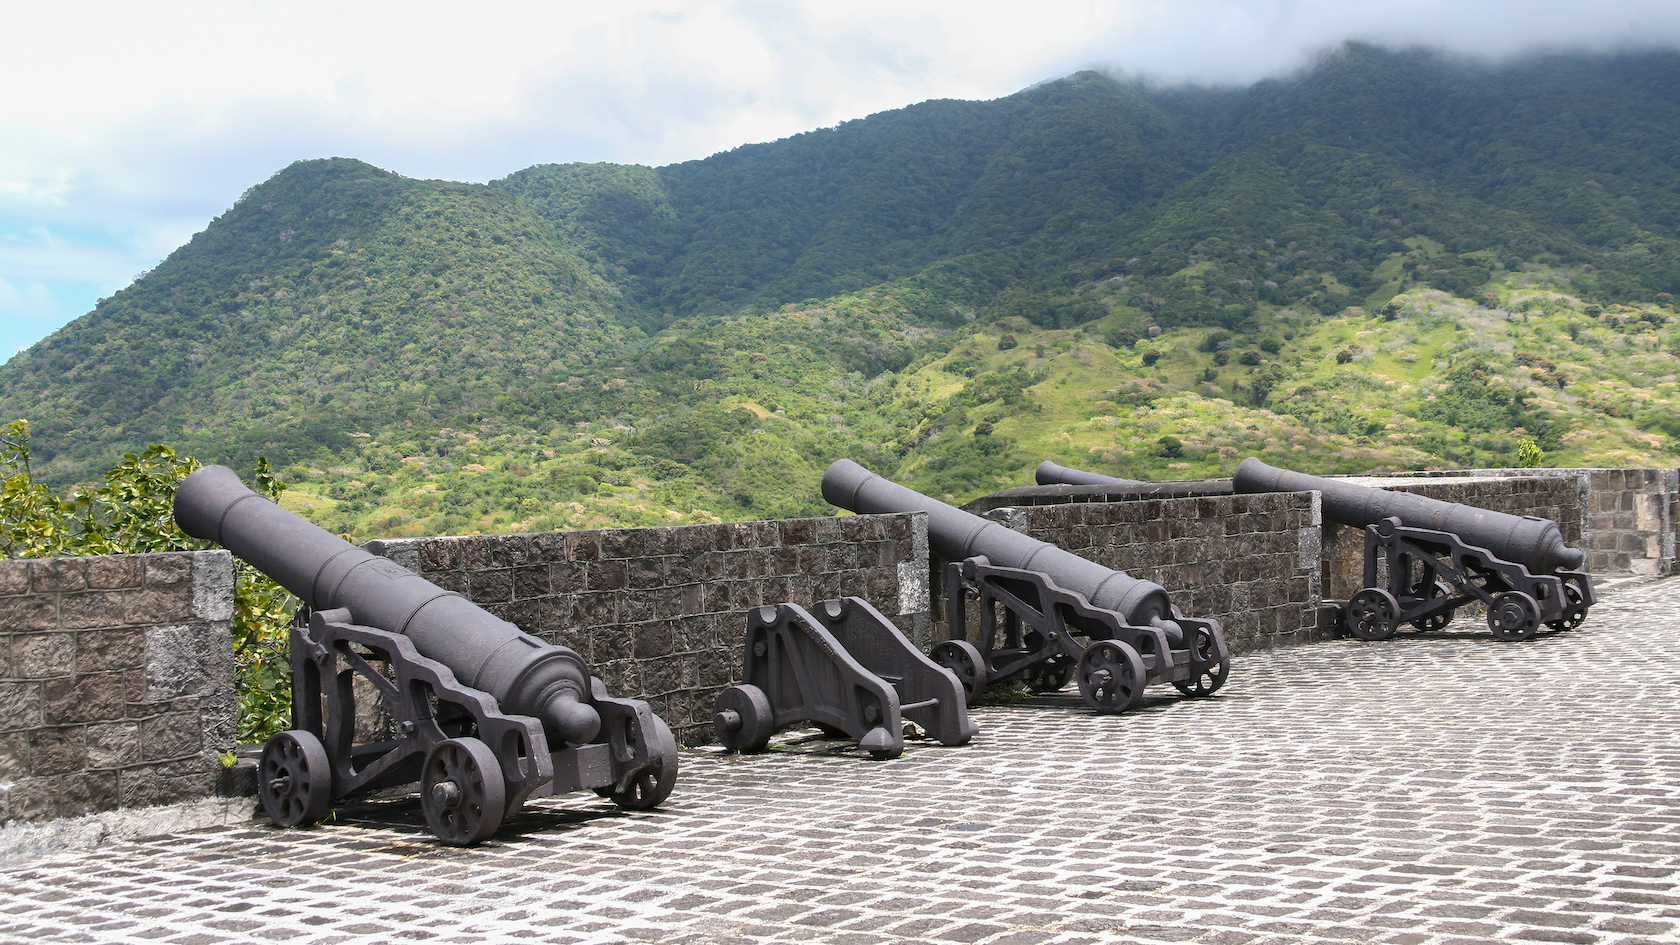 Cannons on the outer wall protected this fortress from invaders